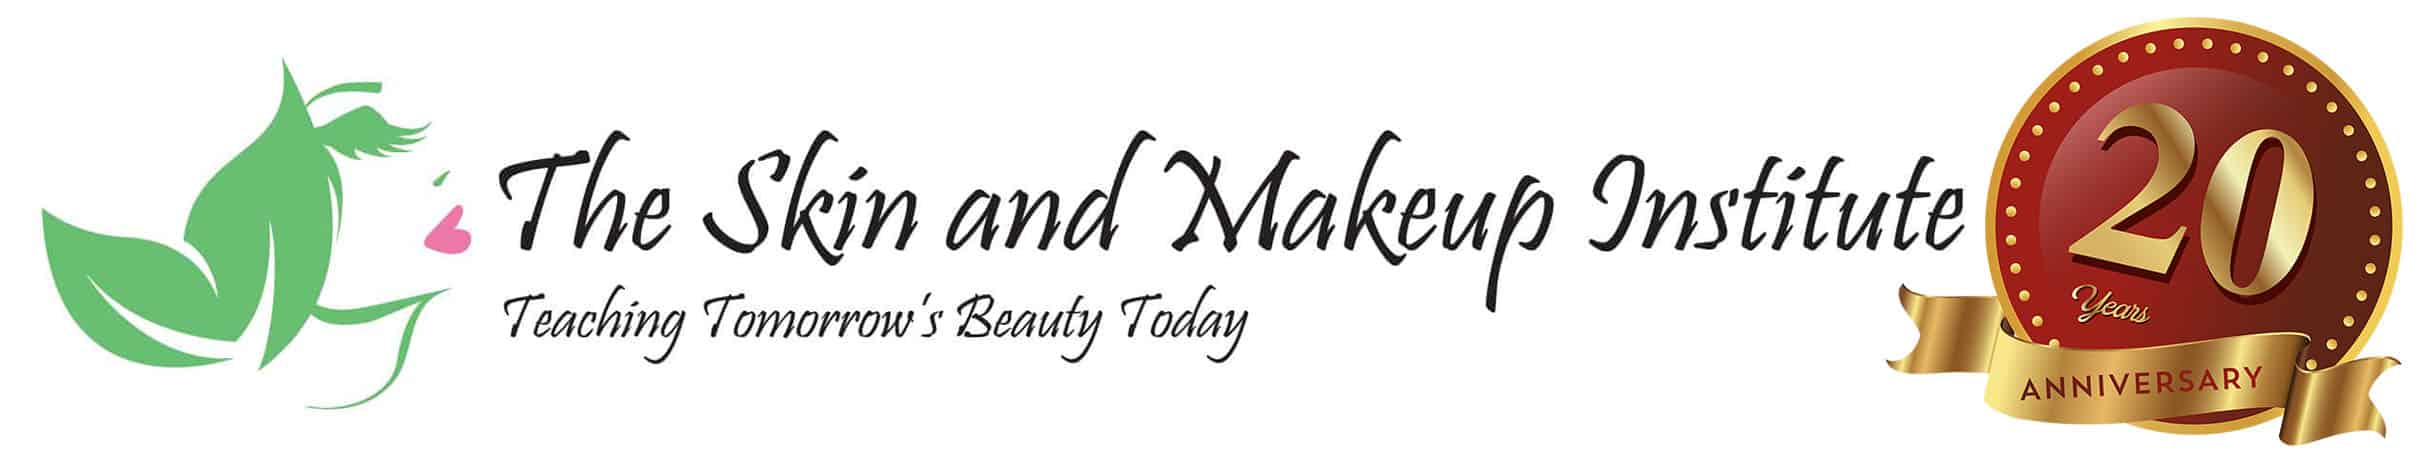 The Skin and Makeup Institute Logo